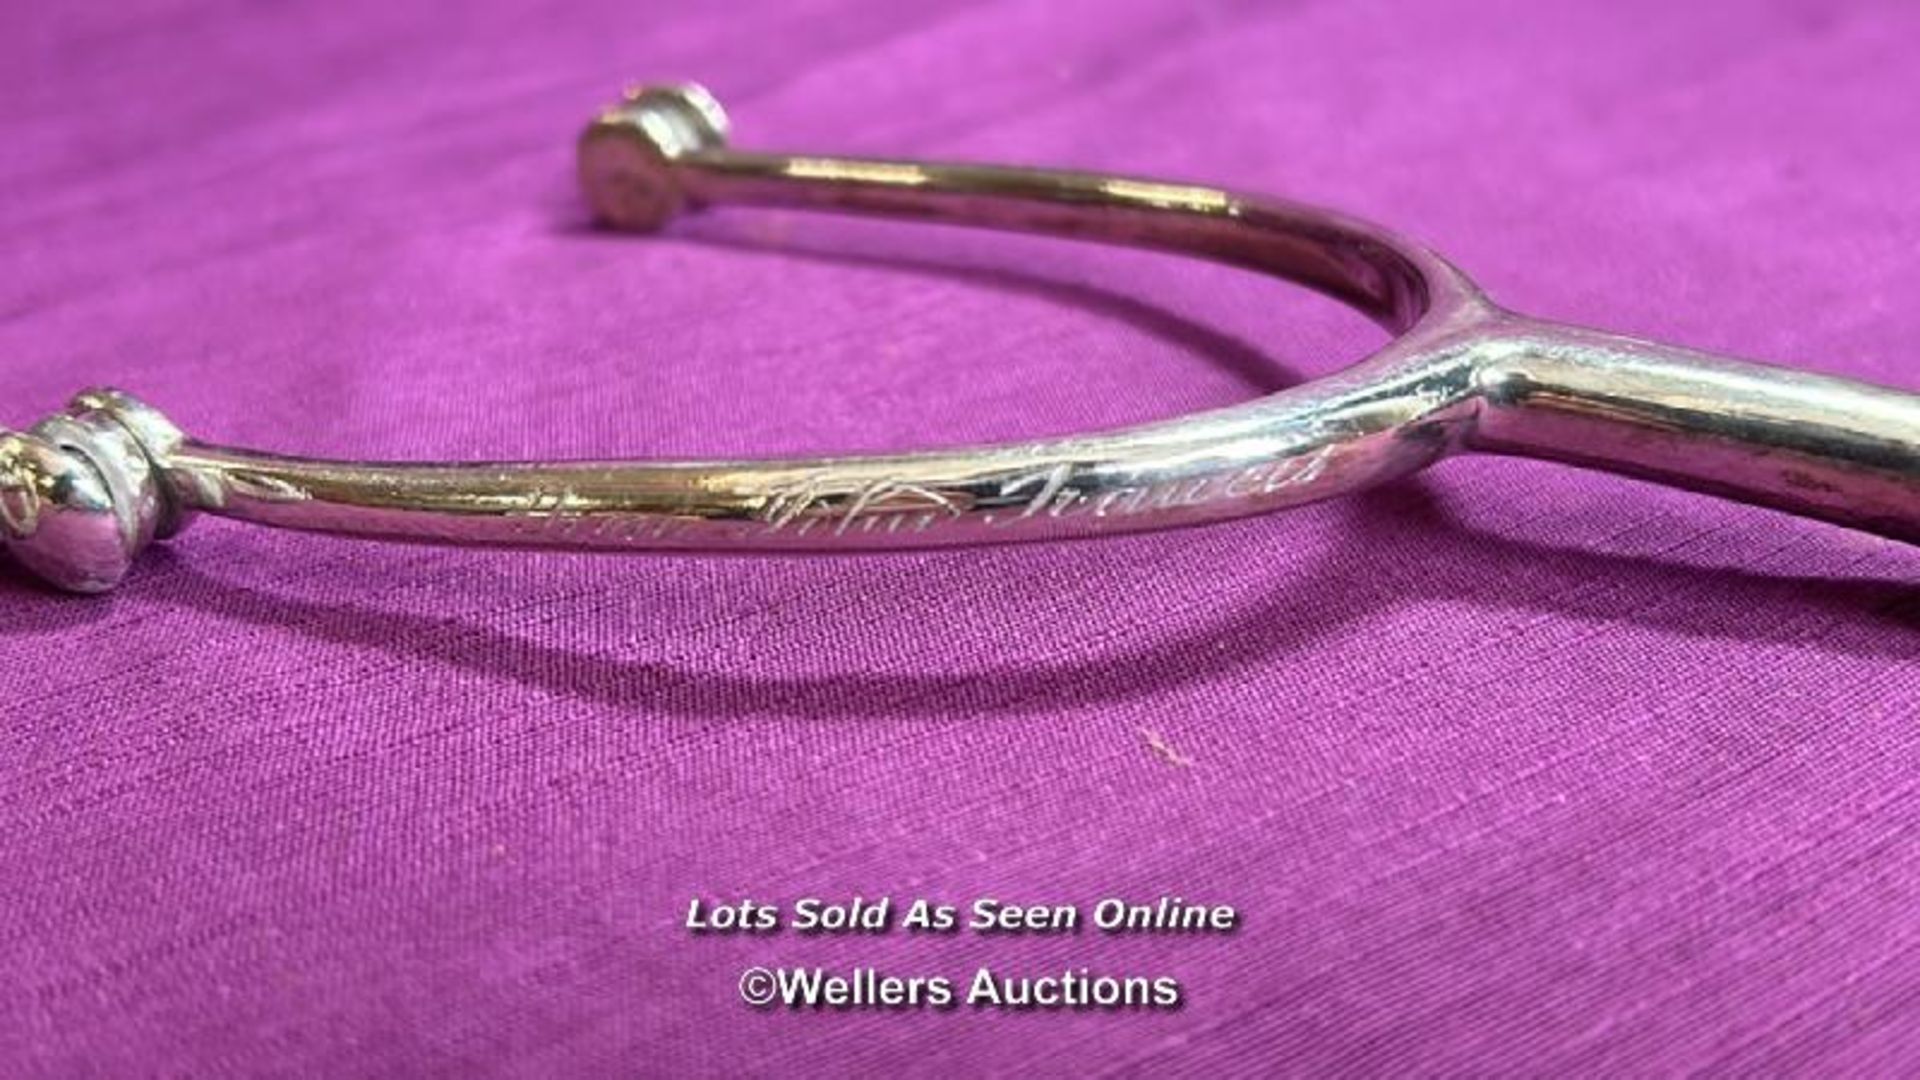 HALLMARKED SILVER SPUR AND BUCKLE, DATED 1895, WITH INSCRIPTION, LENGTH 14CM, WEIGHT 94GMS - Image 3 of 6